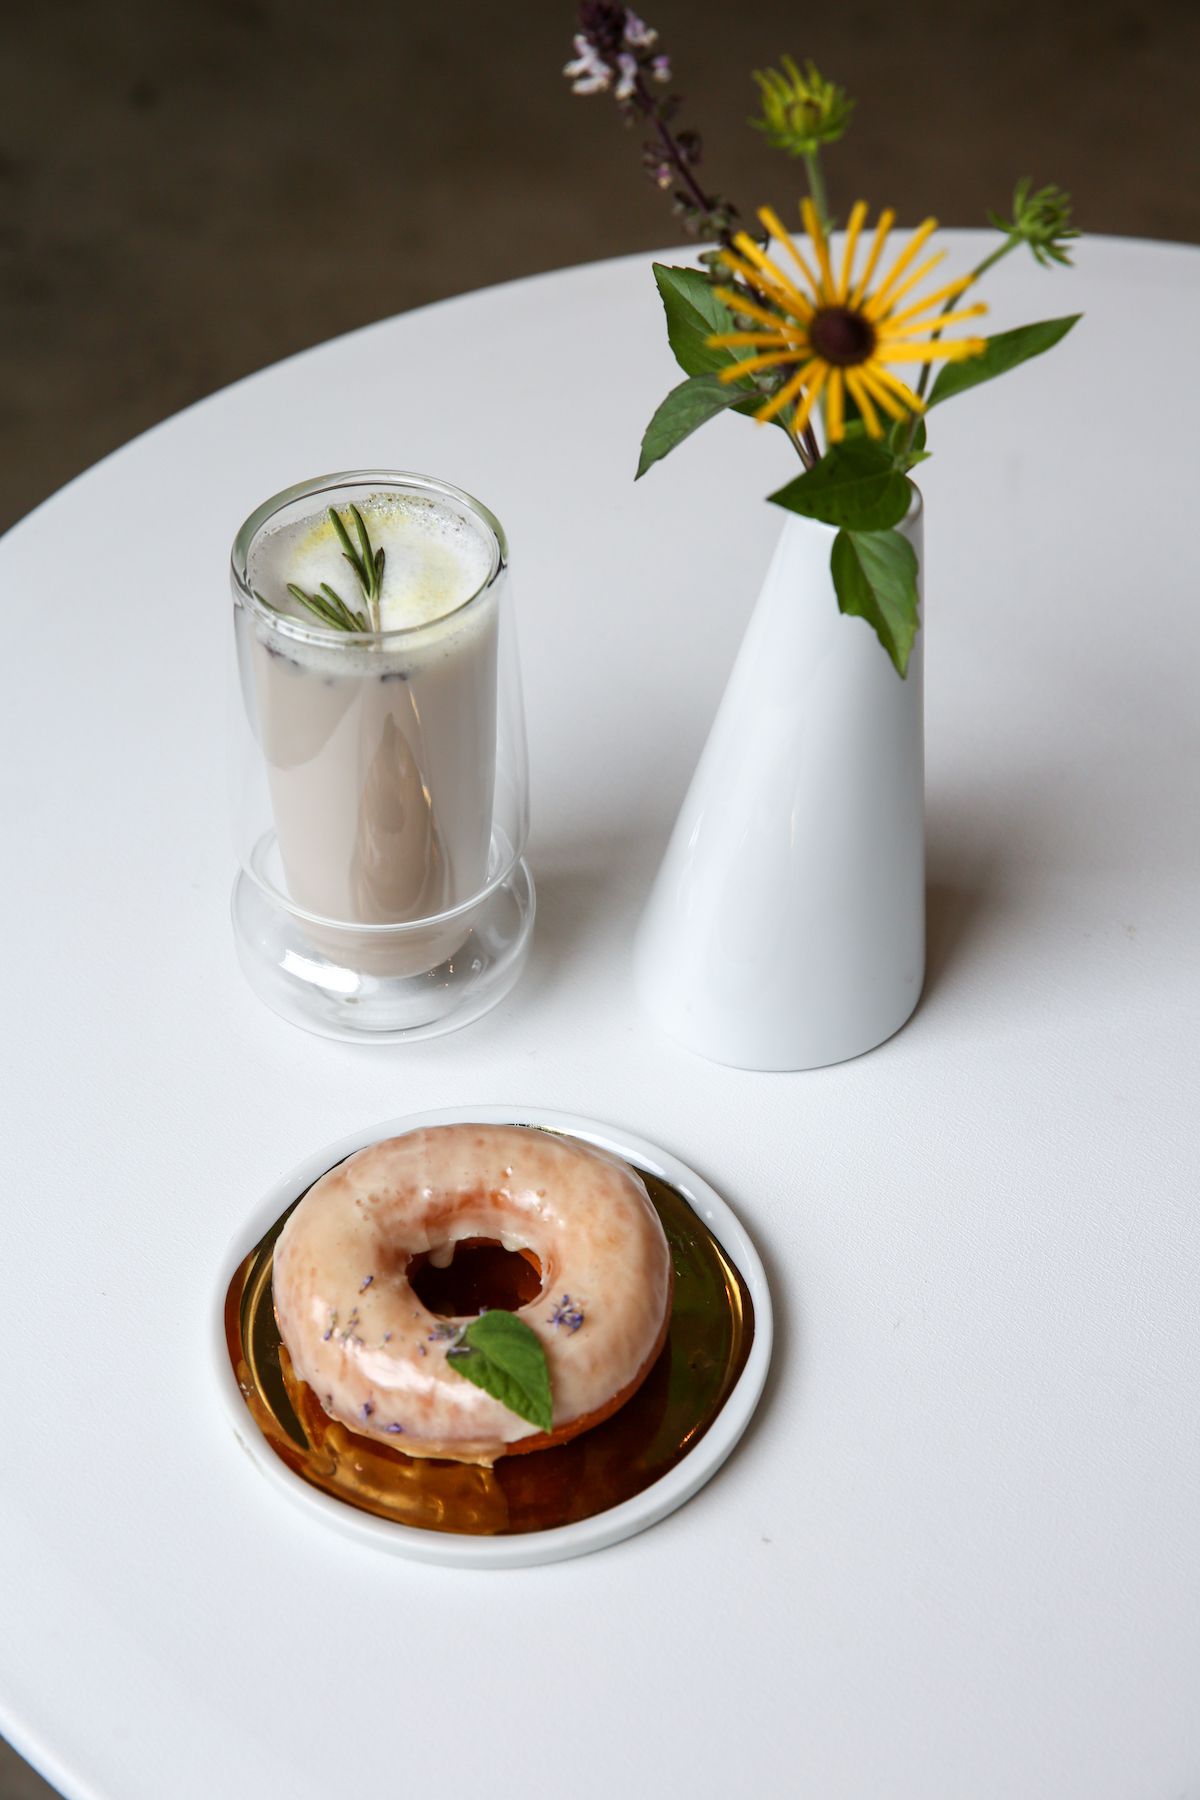 An image with a flower vase with a yellow flower, a white drink, and a white glazed doughnut.